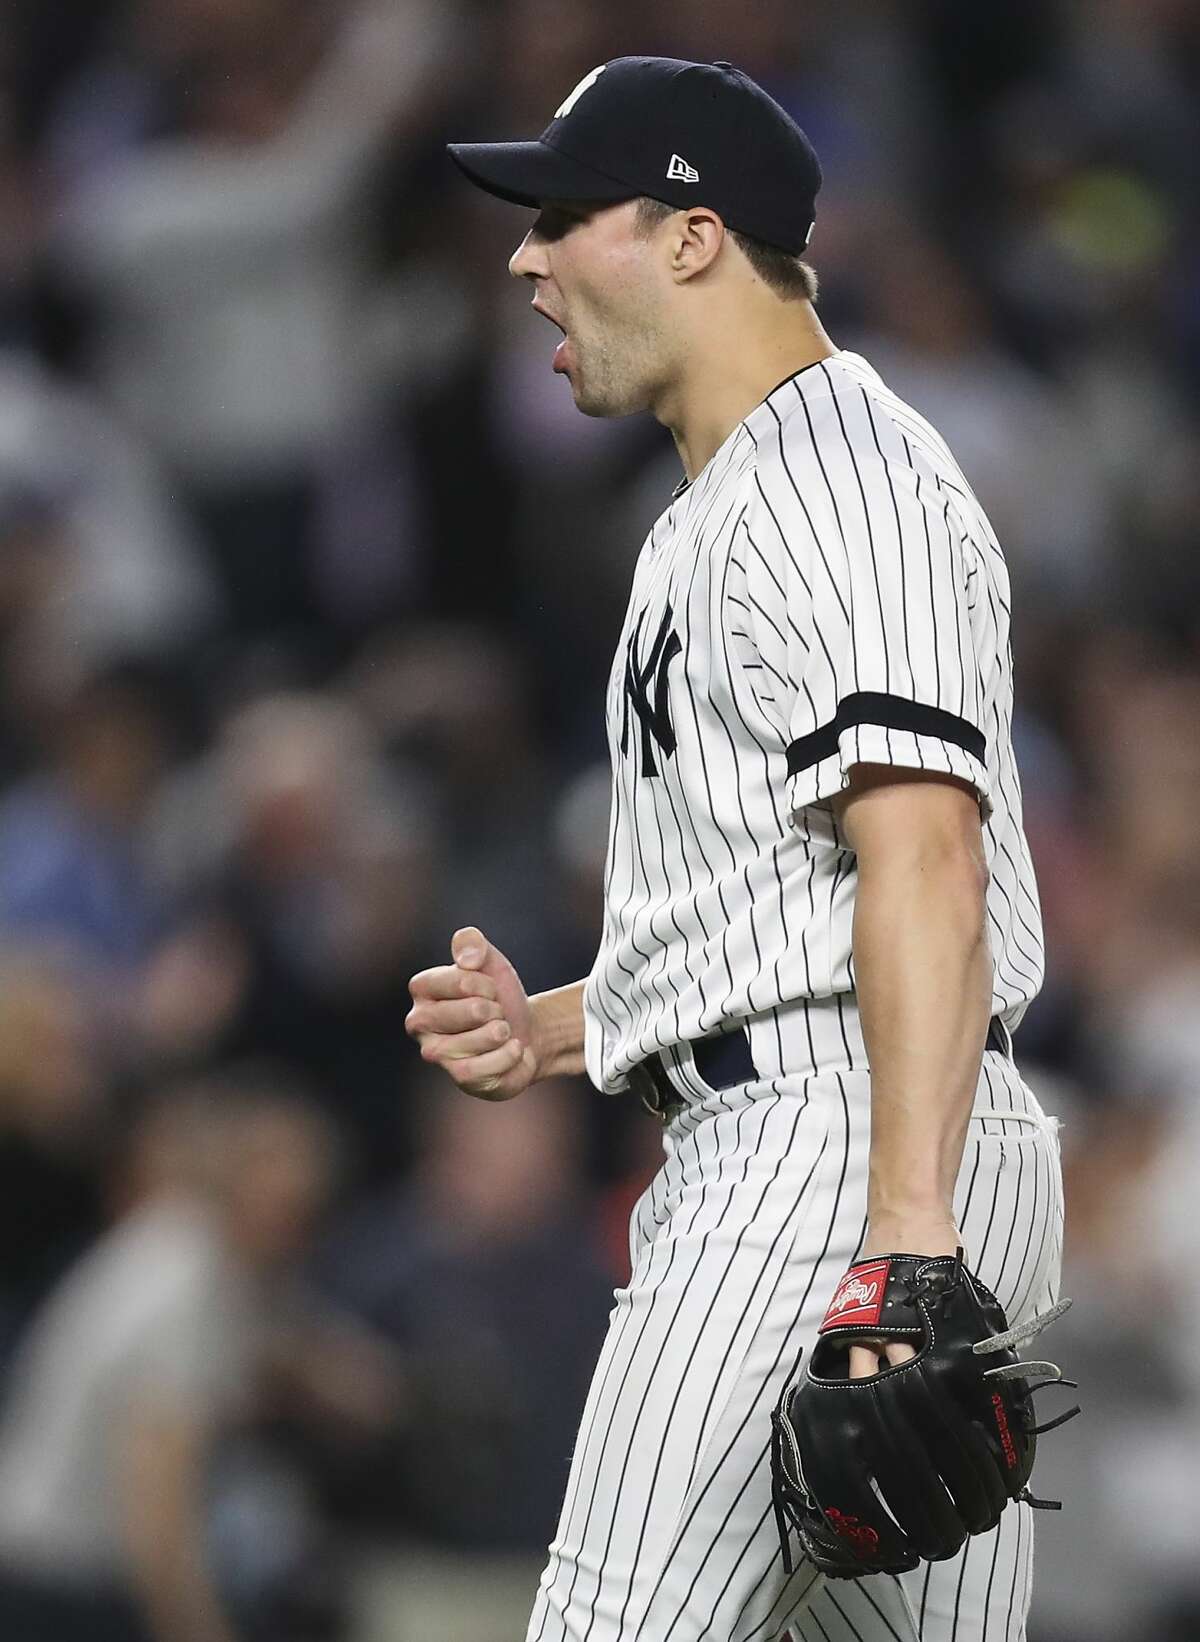 New York Yankees relief pitcher Tommy Kahnle celebrates closing out the Houston Astros during the ninth inning for a 5-0 win in Game 5 of the ALCS at Yankee Stadium on Wednesday, Oct. 18, 2017, in New York. ( Michael Ciaglo / Houston Chronicle )